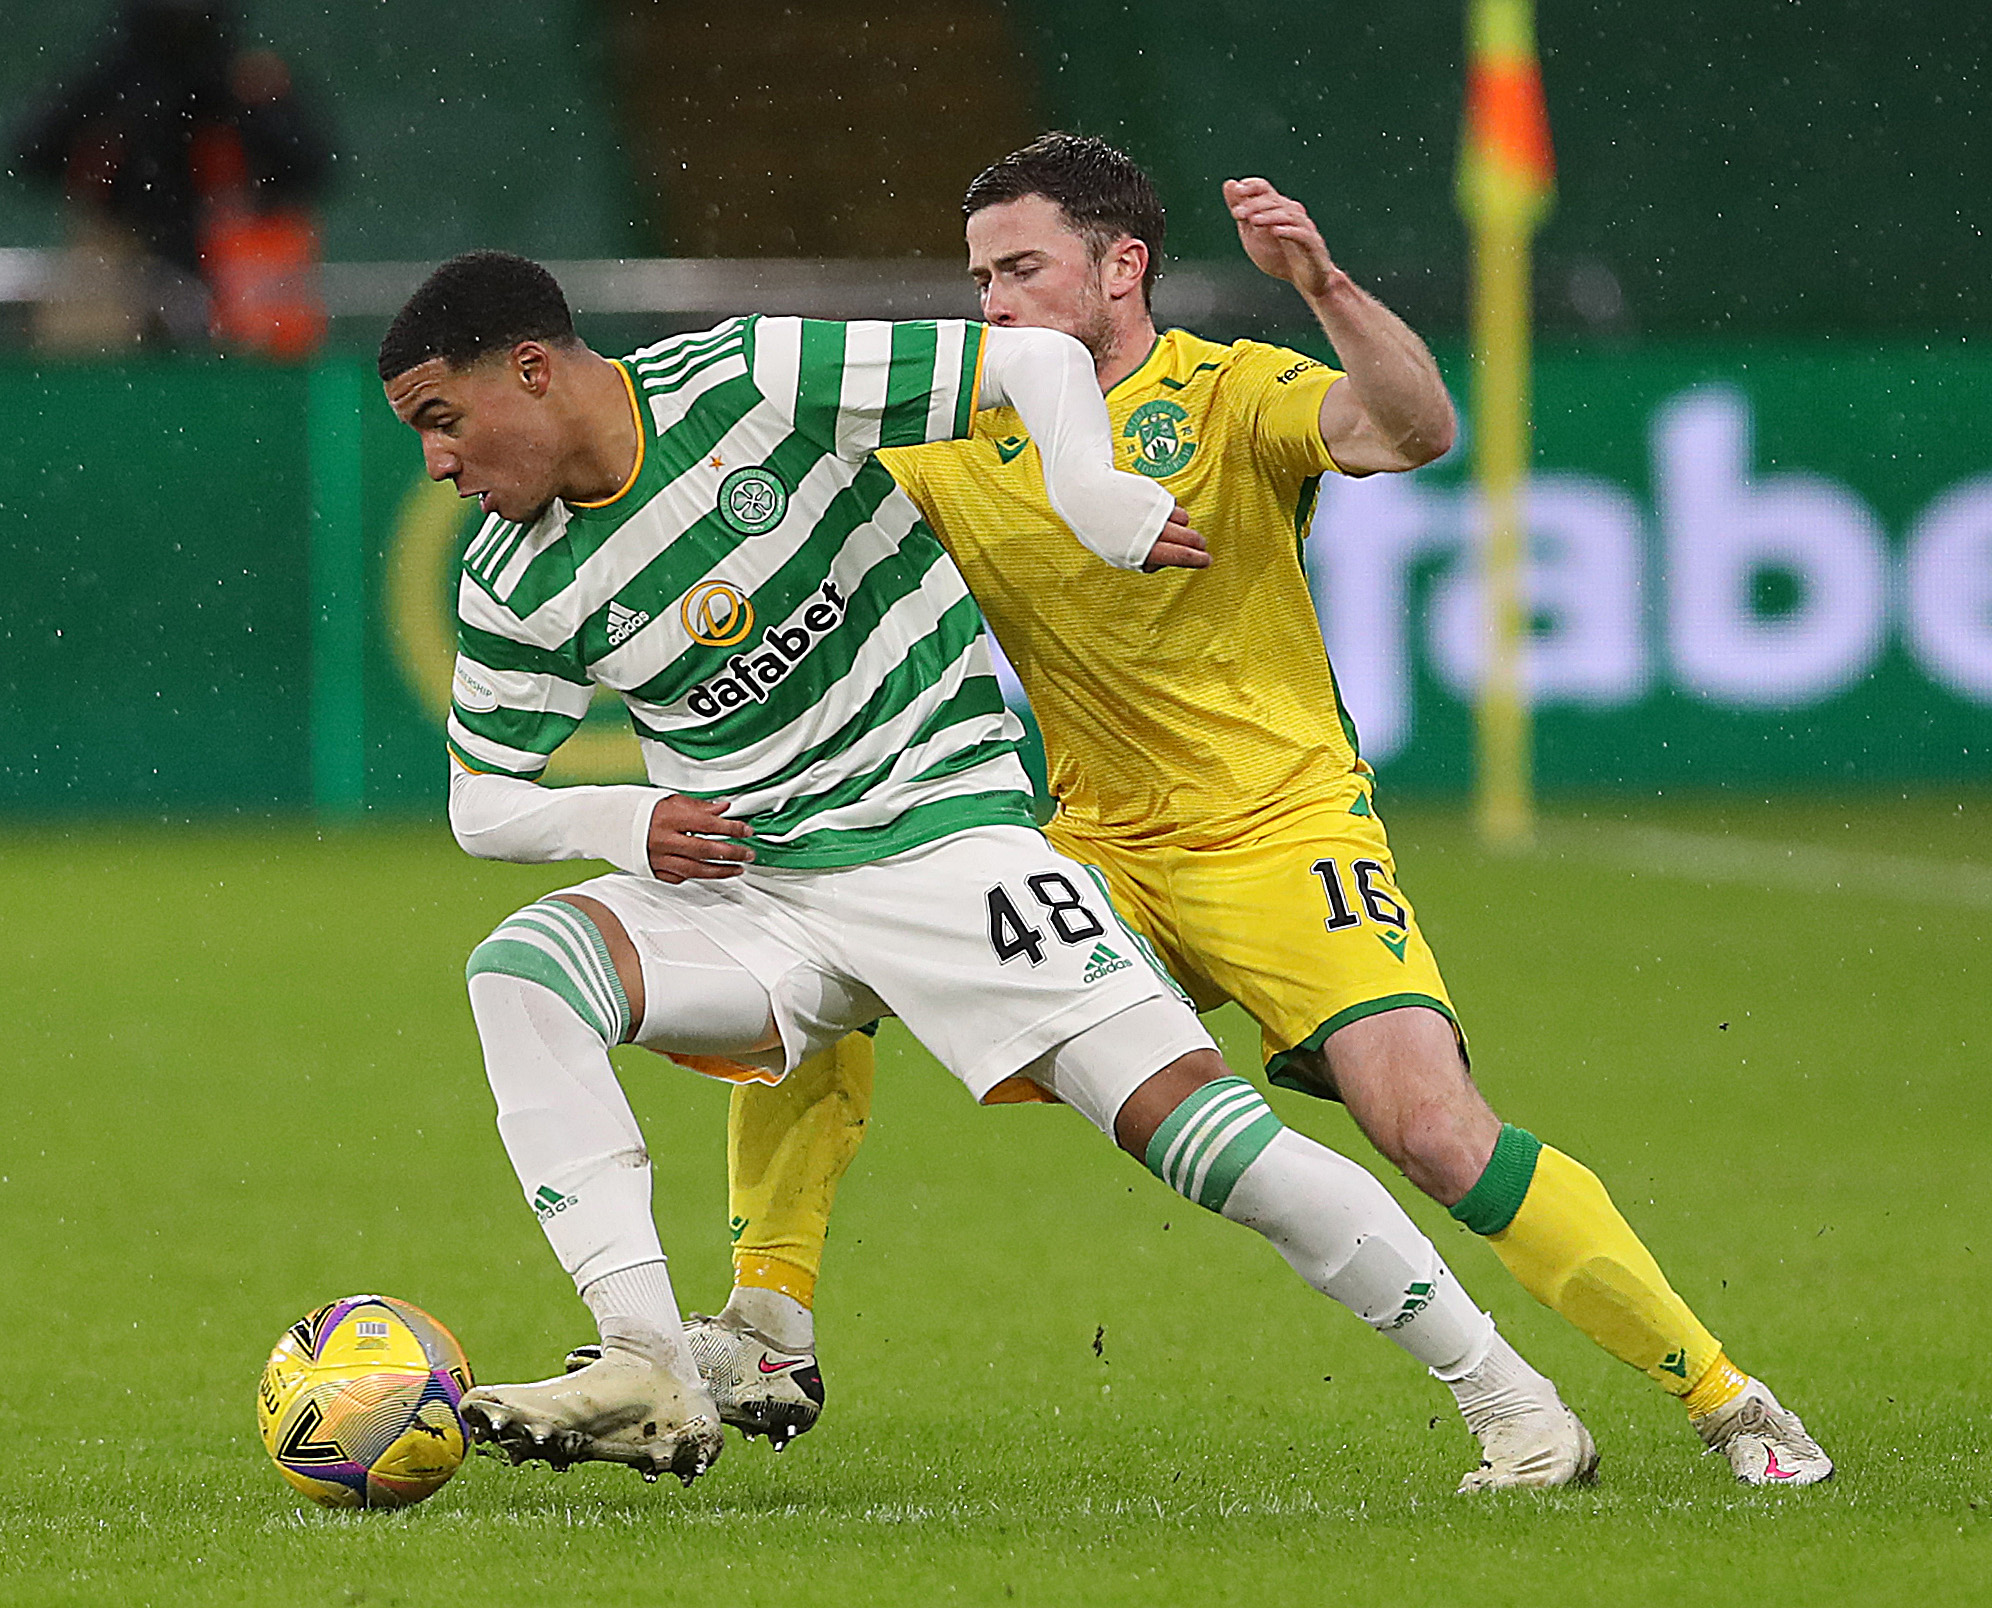 Celtic youngster Armstrong Okoflex travels to complete summer exit to West Ham